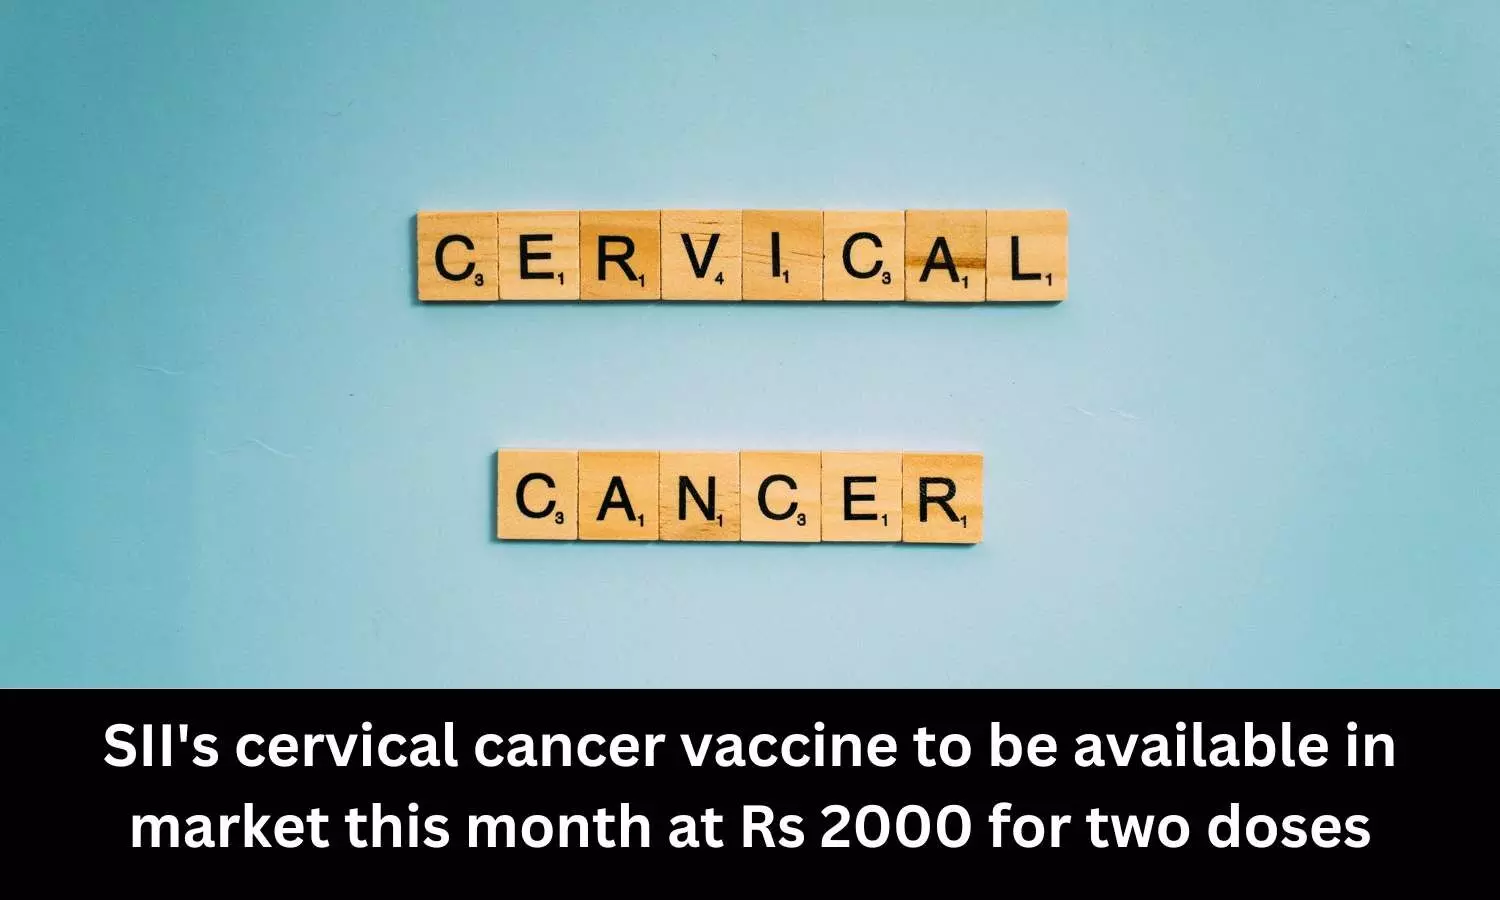 SII cervical cancer vaccine to be available in market this month at Rs 2000 for two doses